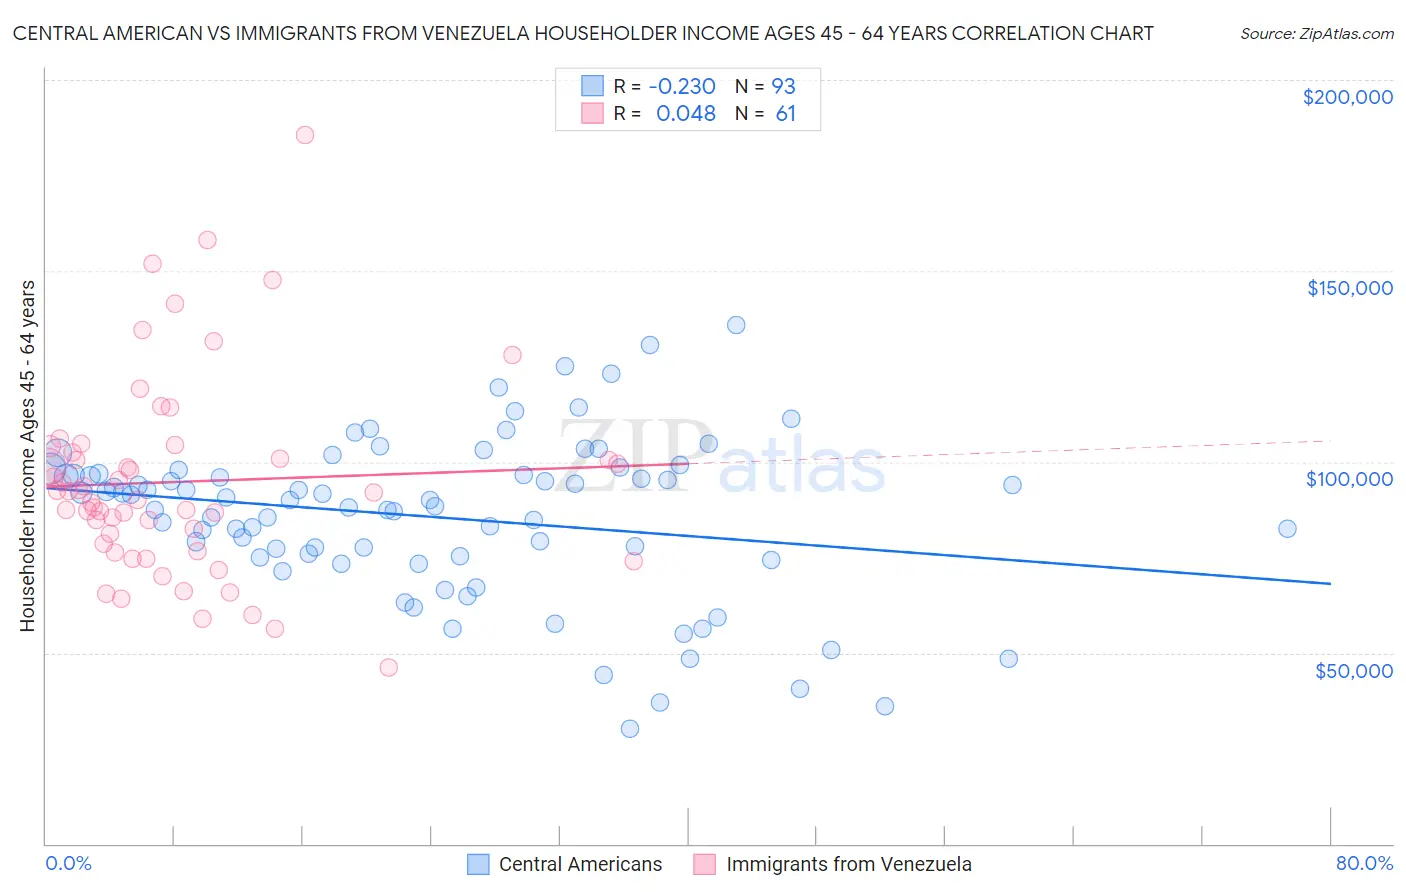 Central American vs Immigrants from Venezuela Householder Income Ages 45 - 64 years